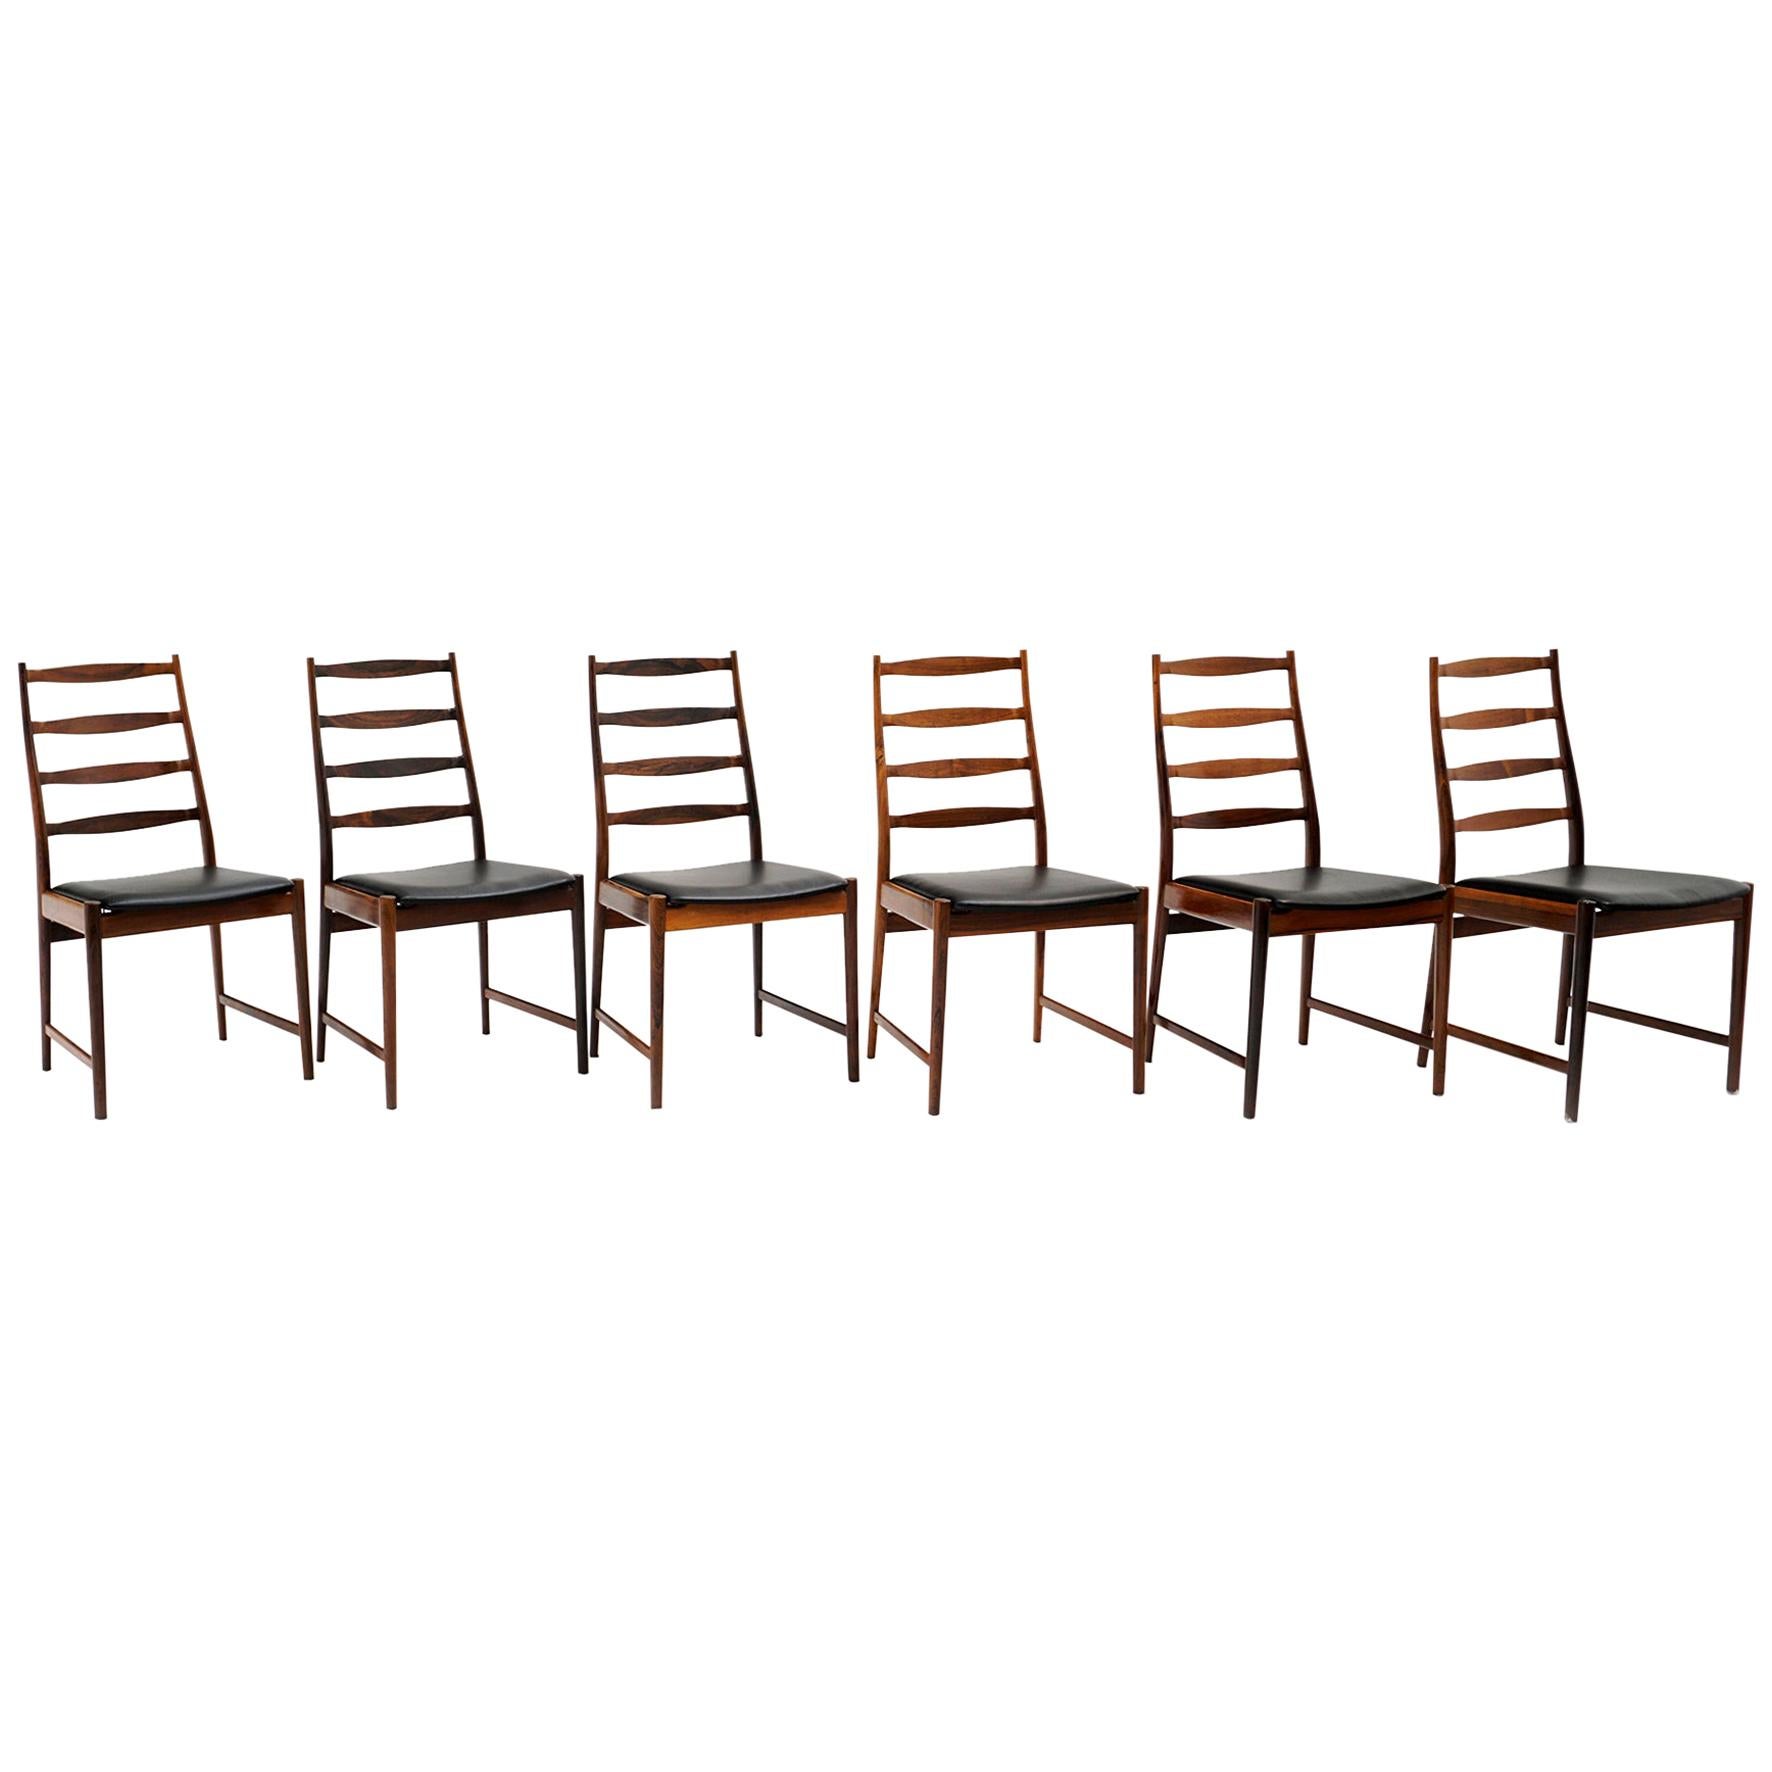 Six Danish Modern Rosewood Ladder Back Dining Chairs by Arne Vodder, Black Seats